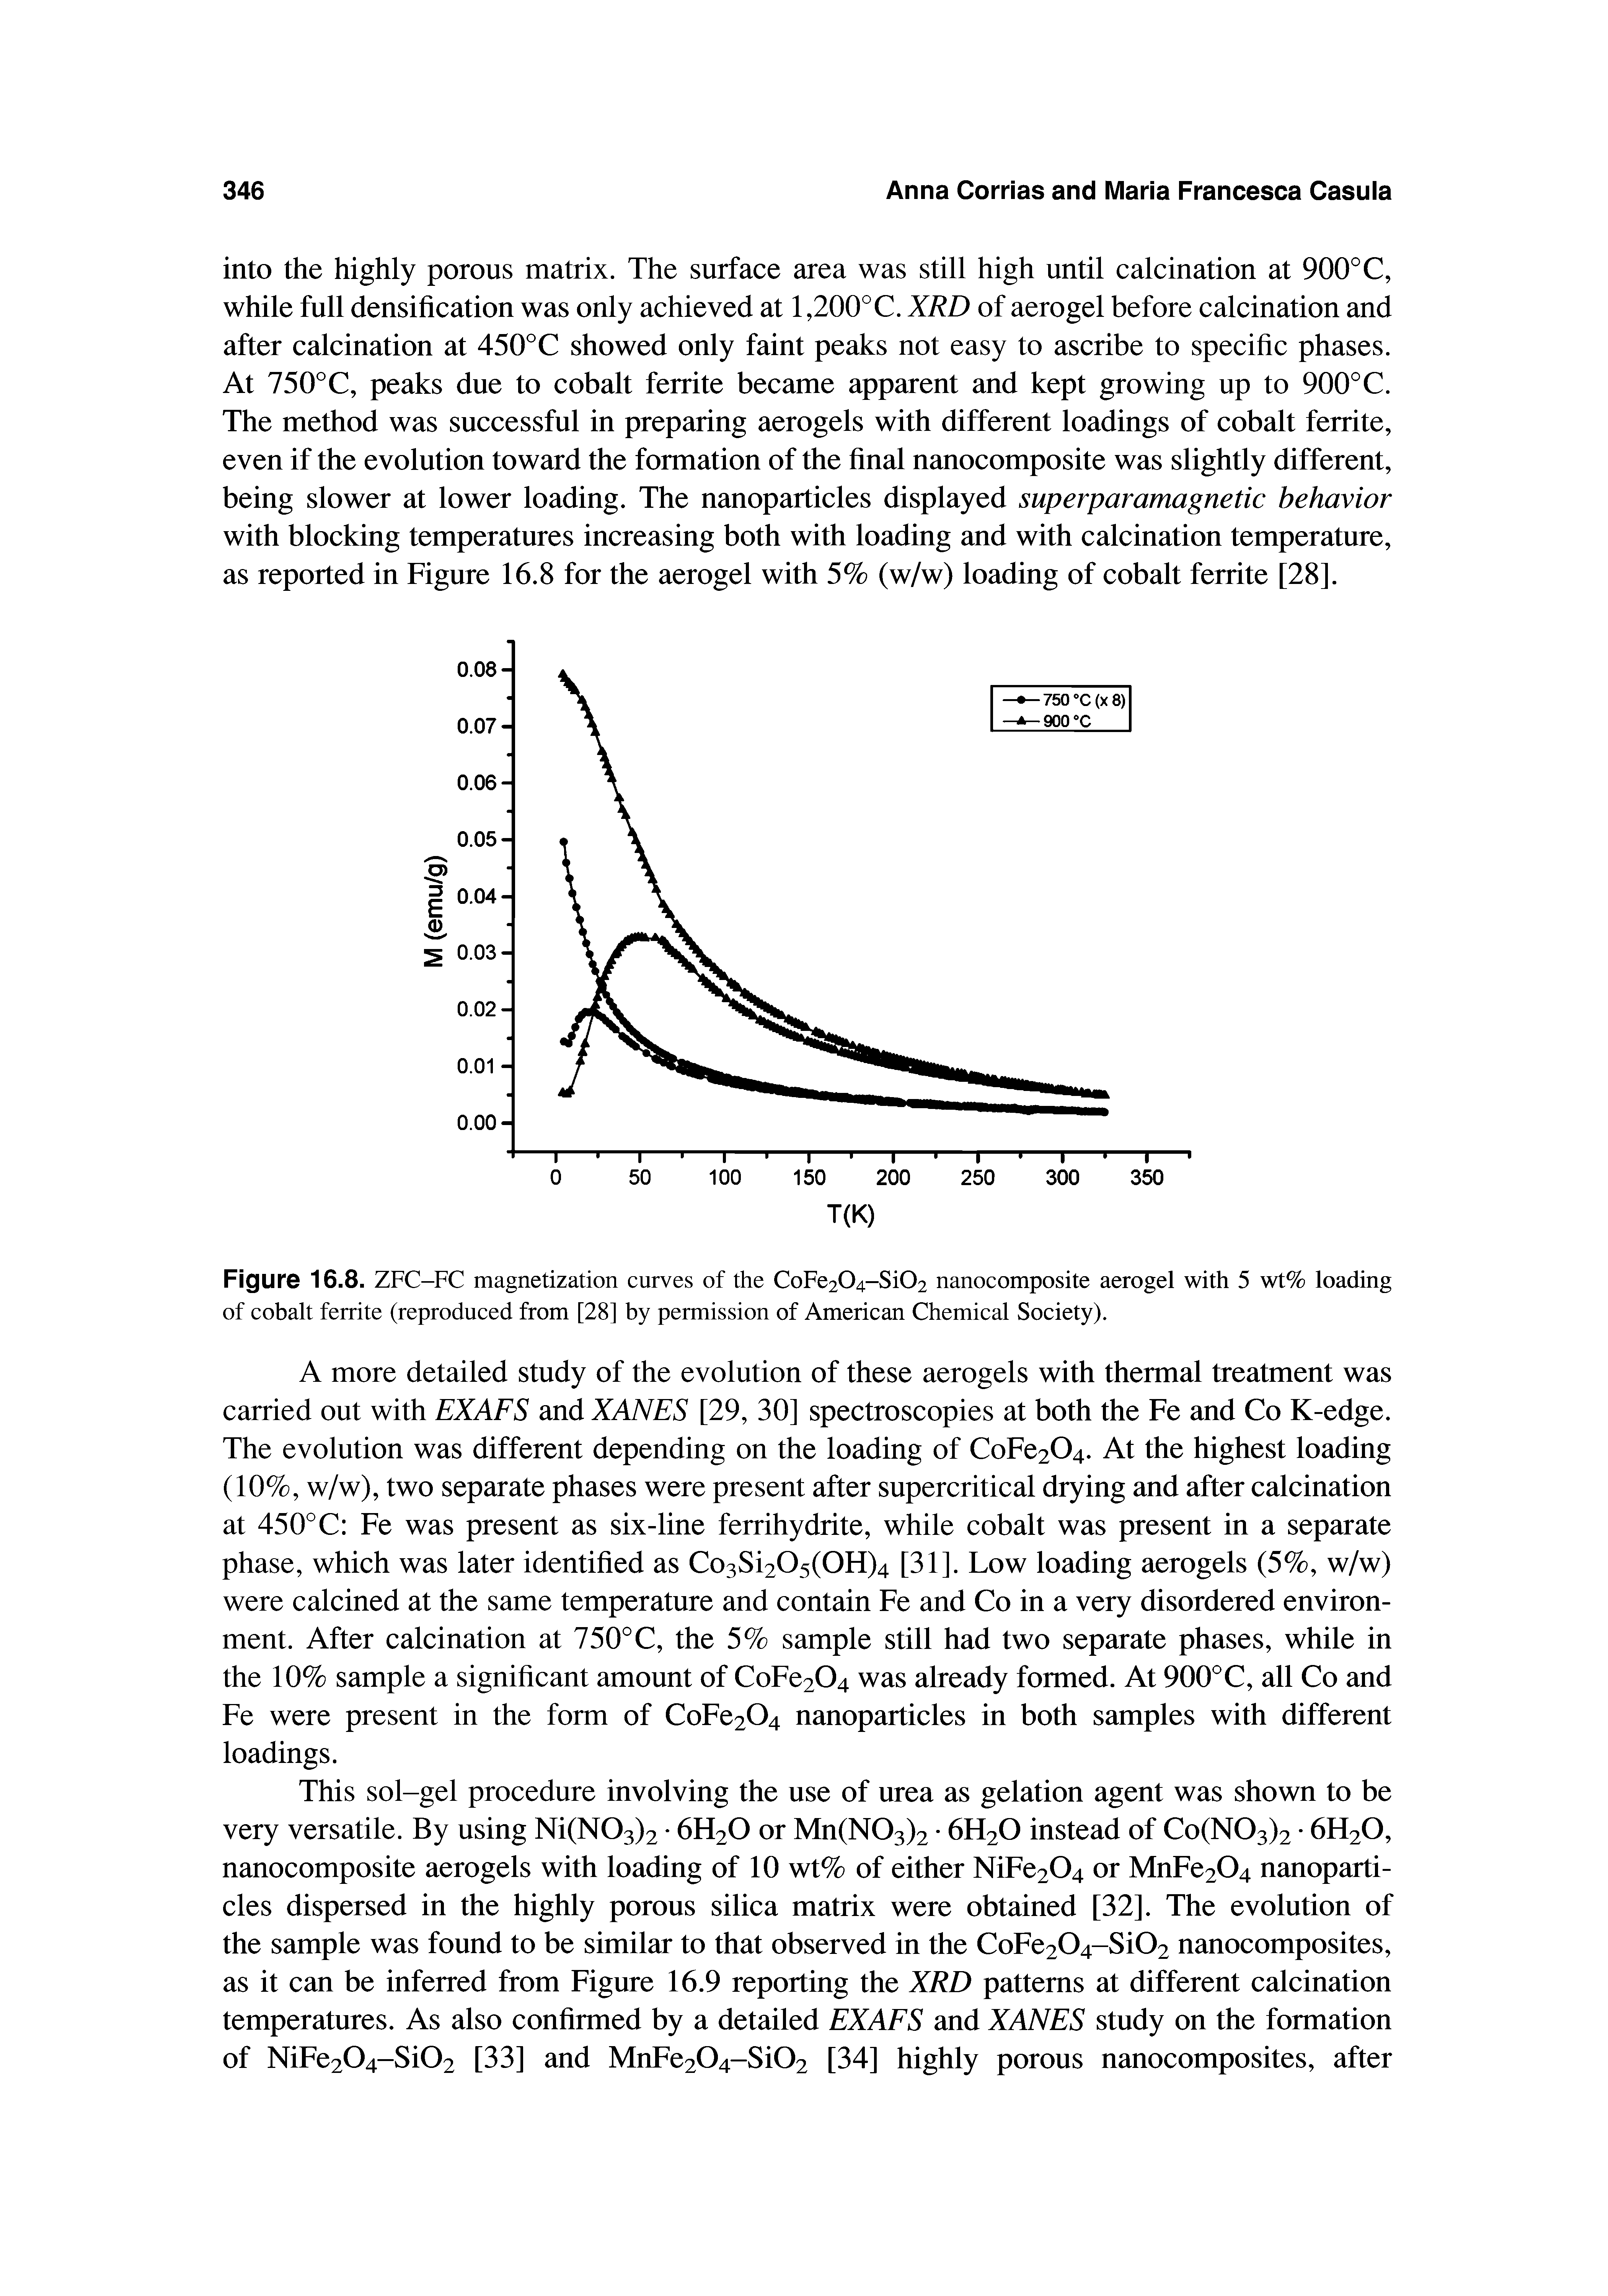 Figure 16.8. ZFC-FC magnetization curves of the CoFe204-Si02 nanocomposite aerogel with 5 wt% loading of cobalt ferrite (reproduced from [28] by permission of American Chemical Society).